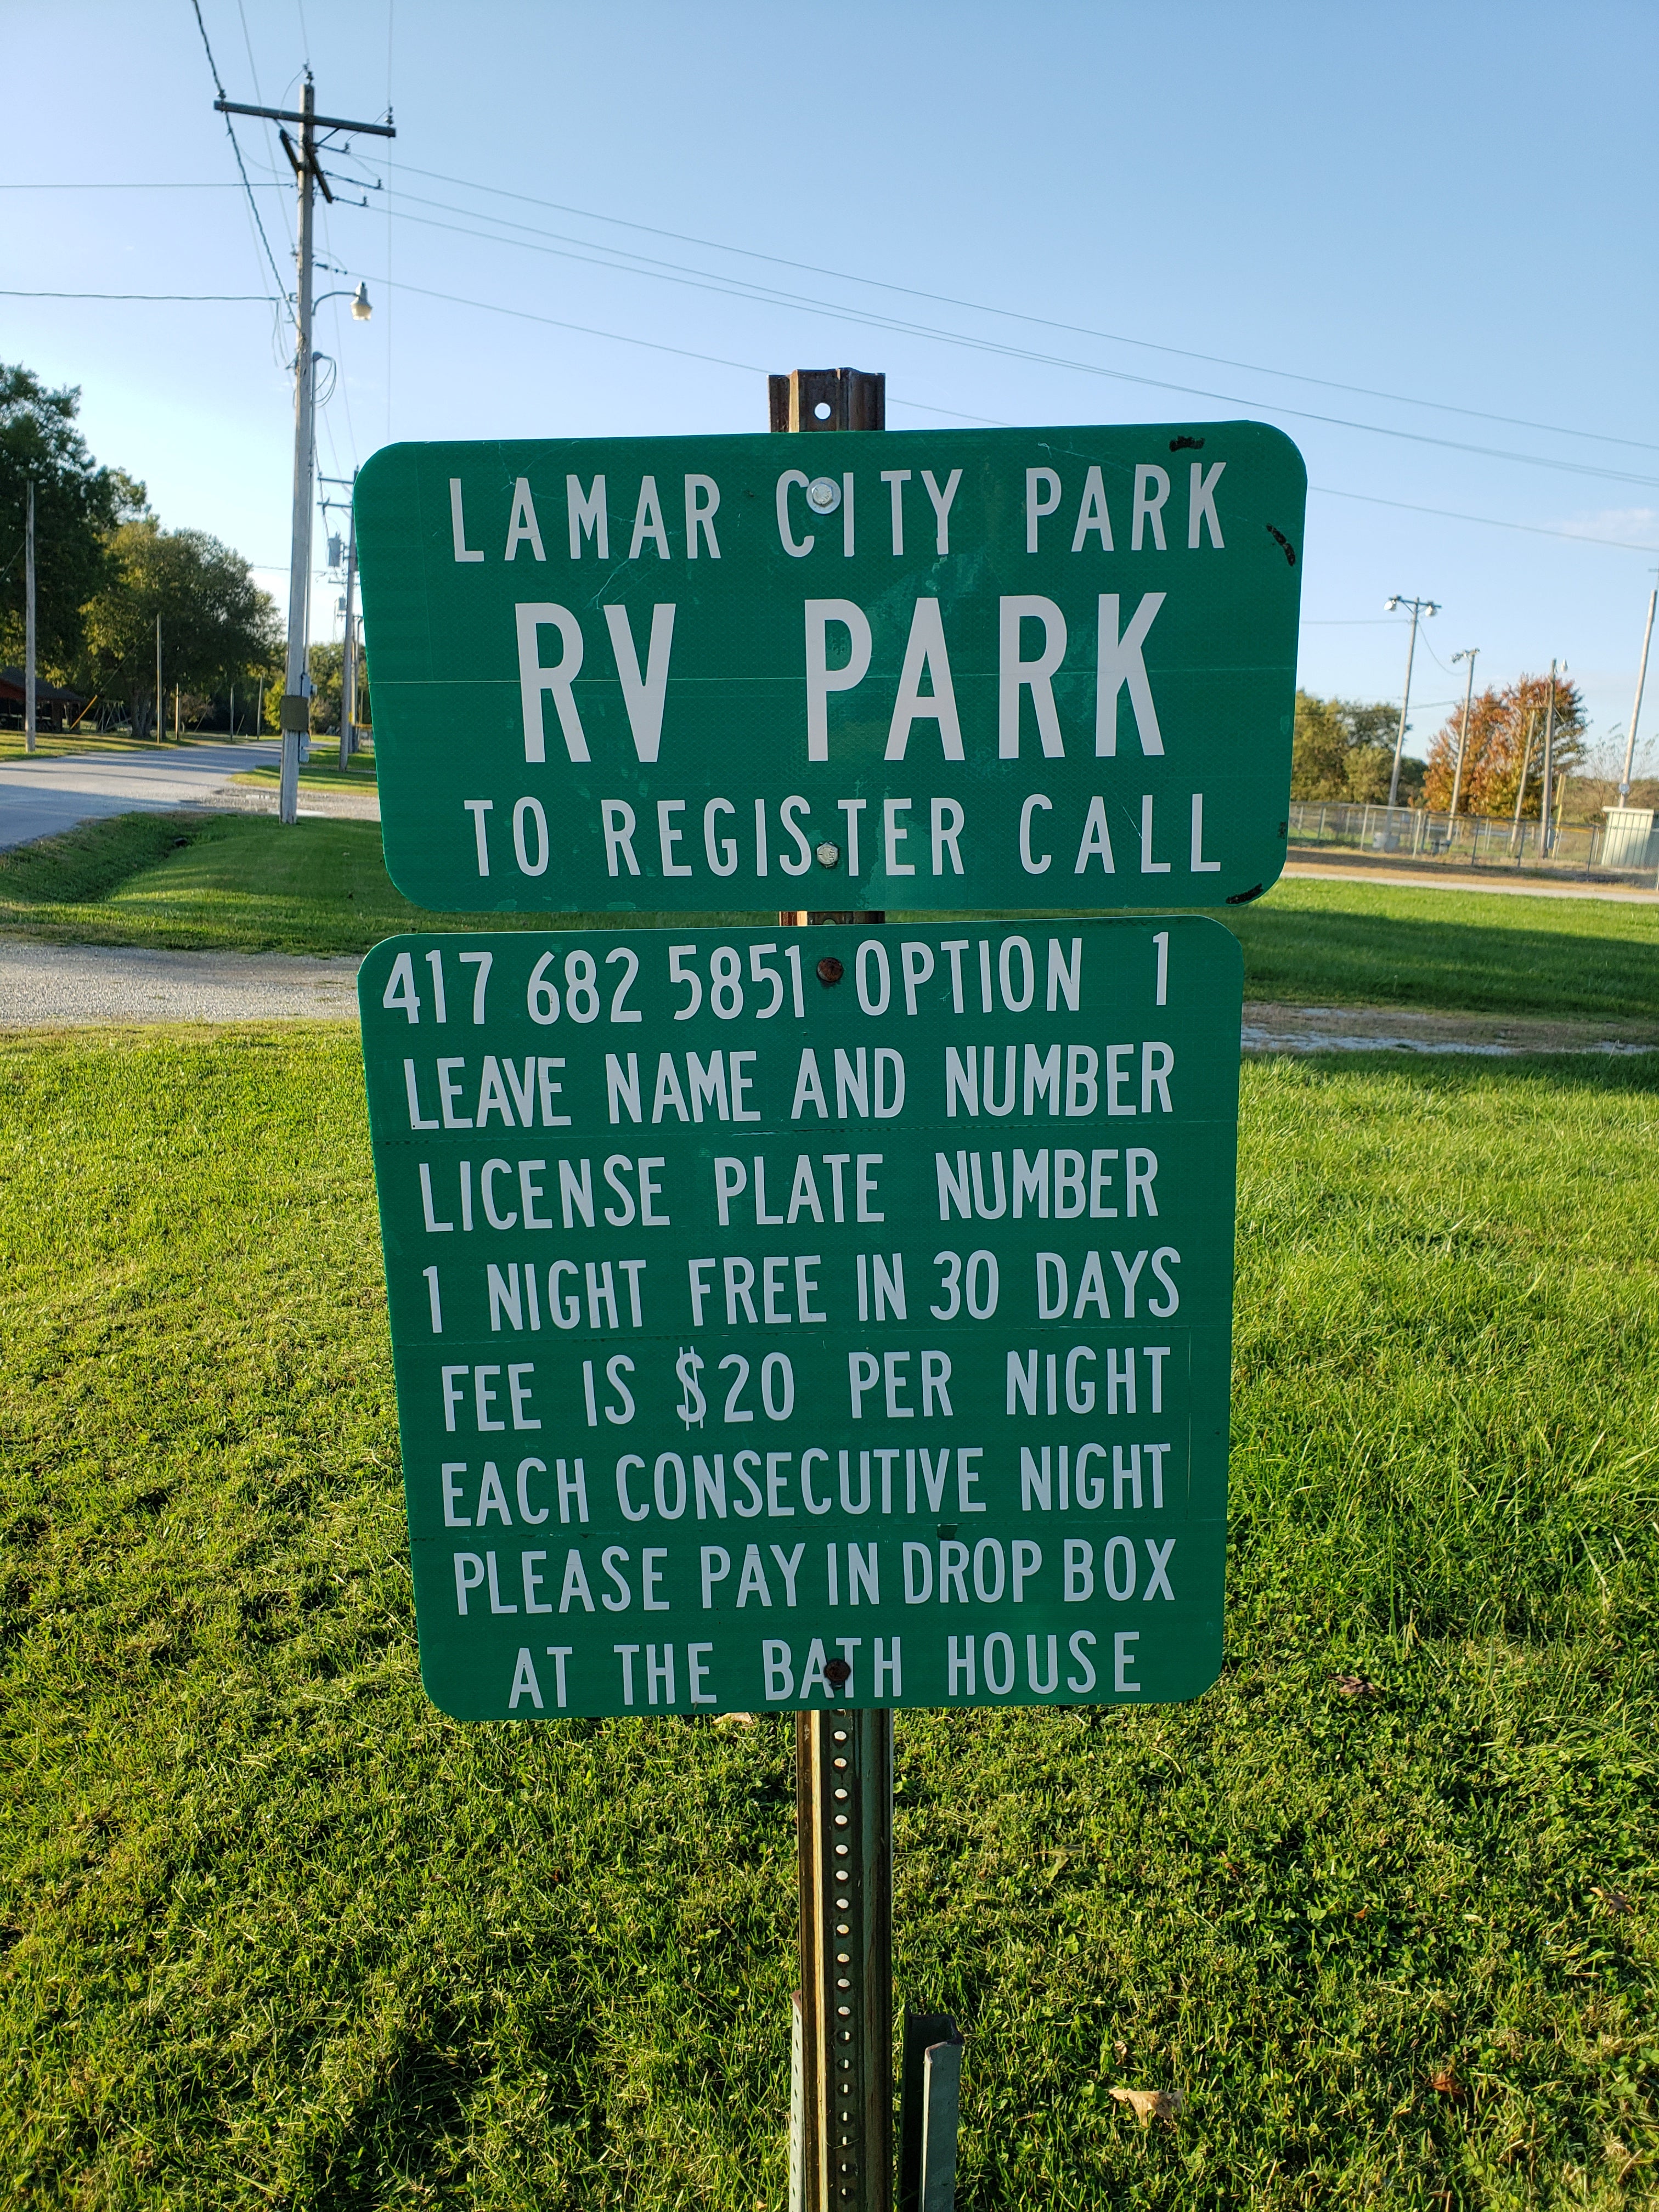 Camper submitted image from Lamar City Park - 1